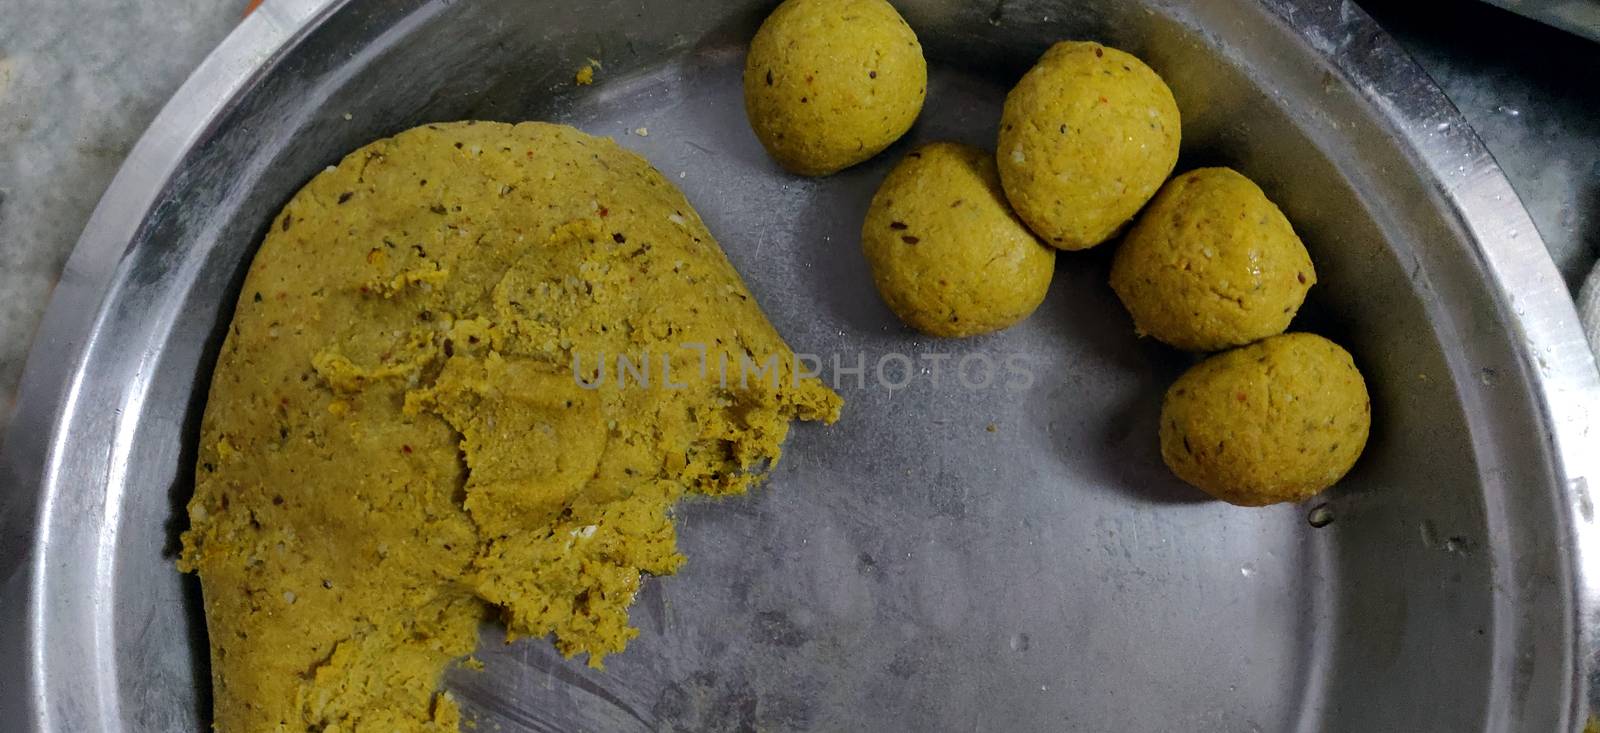 Puri (also Poori), a deep-fat fried bread made from unleavened whole-wheat flour that originated in the Indian subcontinent, in progress dough.